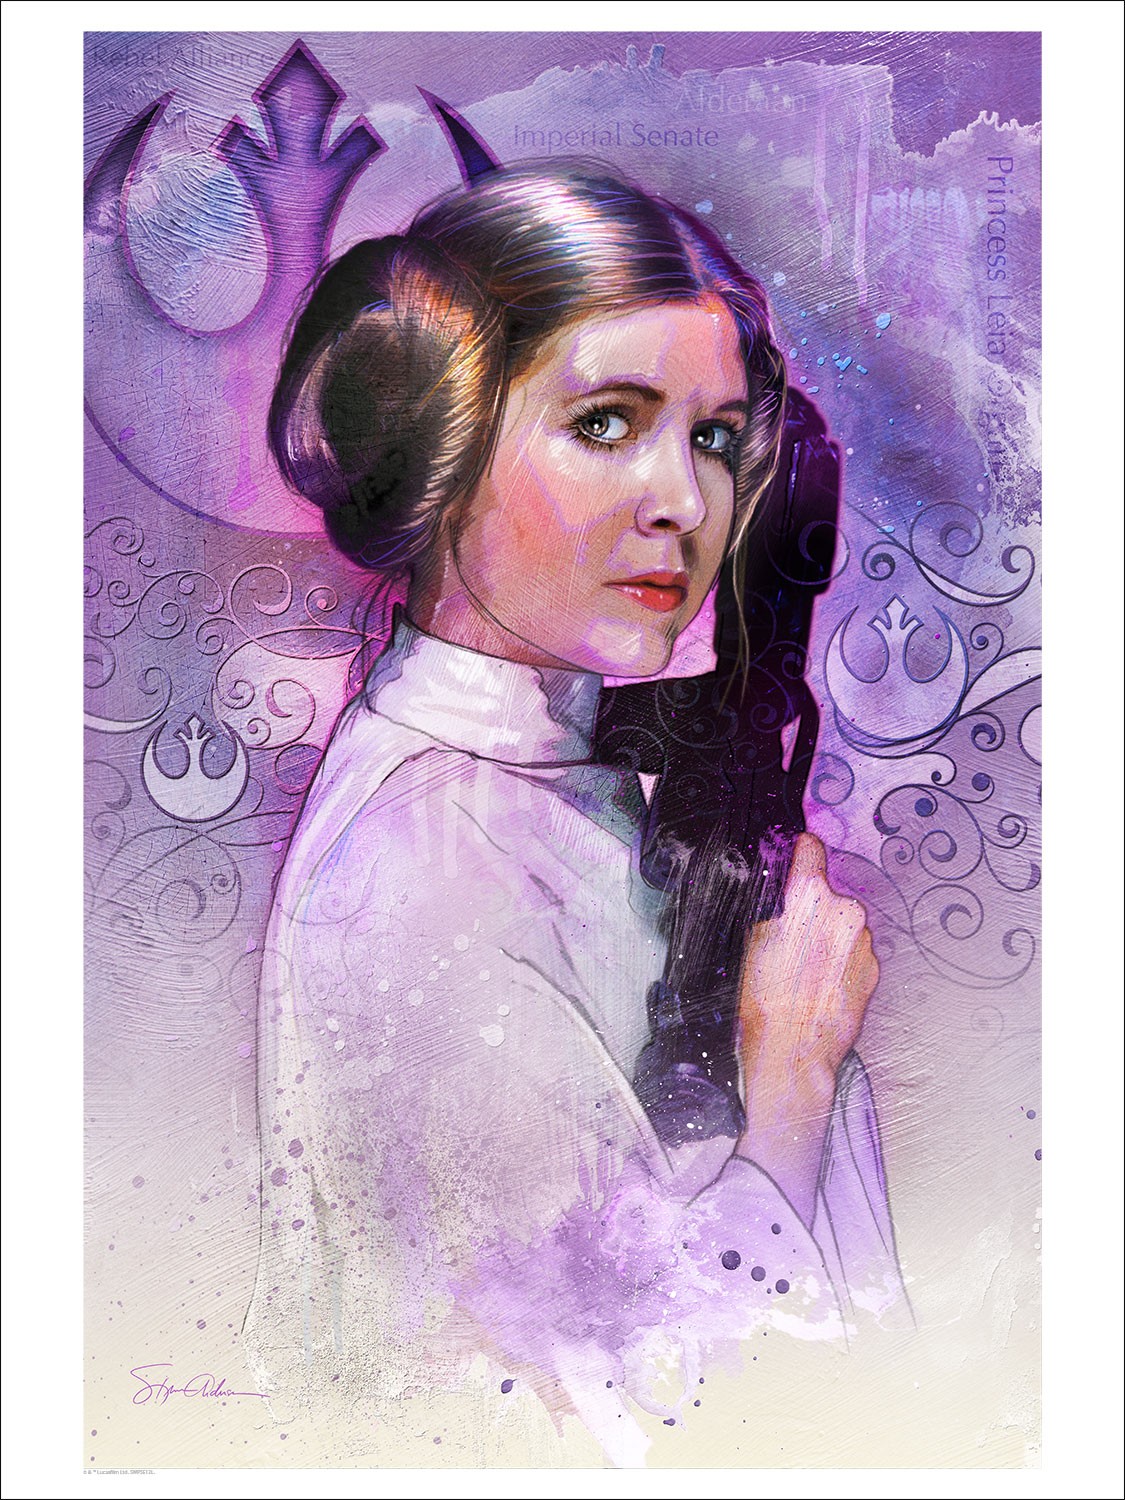 General 1125x1500 Star Wars Join the Alliance Leia Organa blaster Carrie Fisher artwork Rebel Alliance Star Wars Heroes actress deceased movie characters